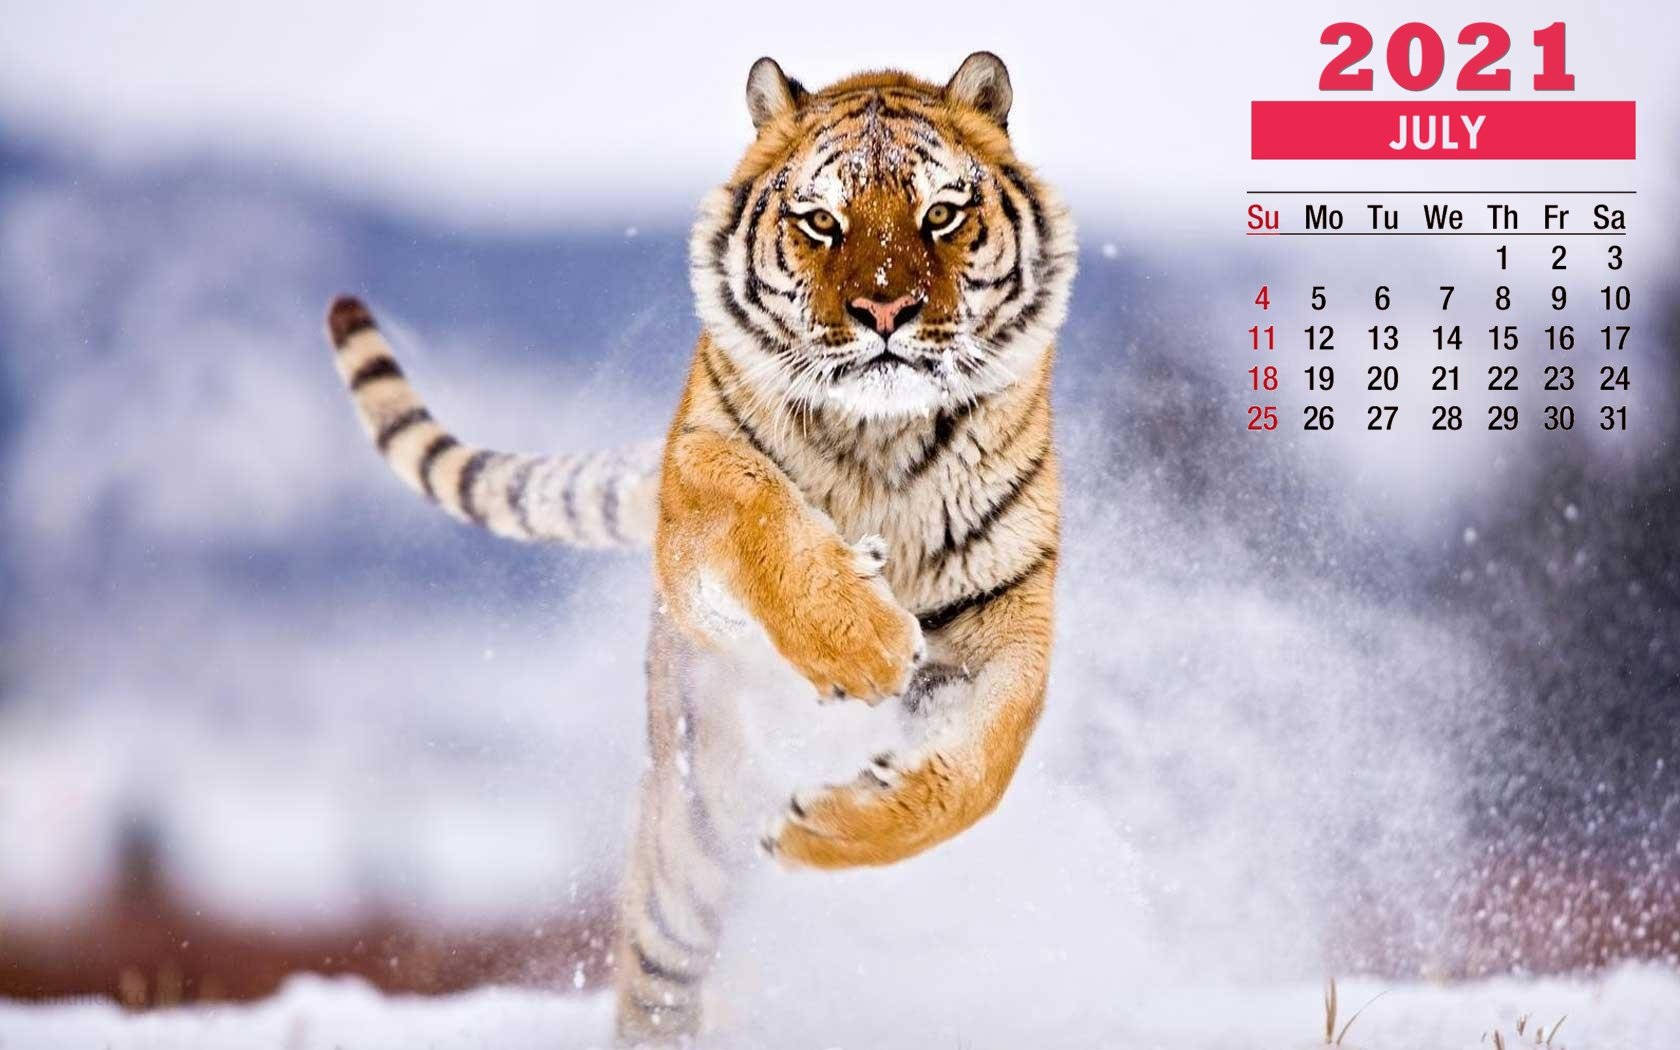 July 2021 Calendar With Tiger Wallpaper